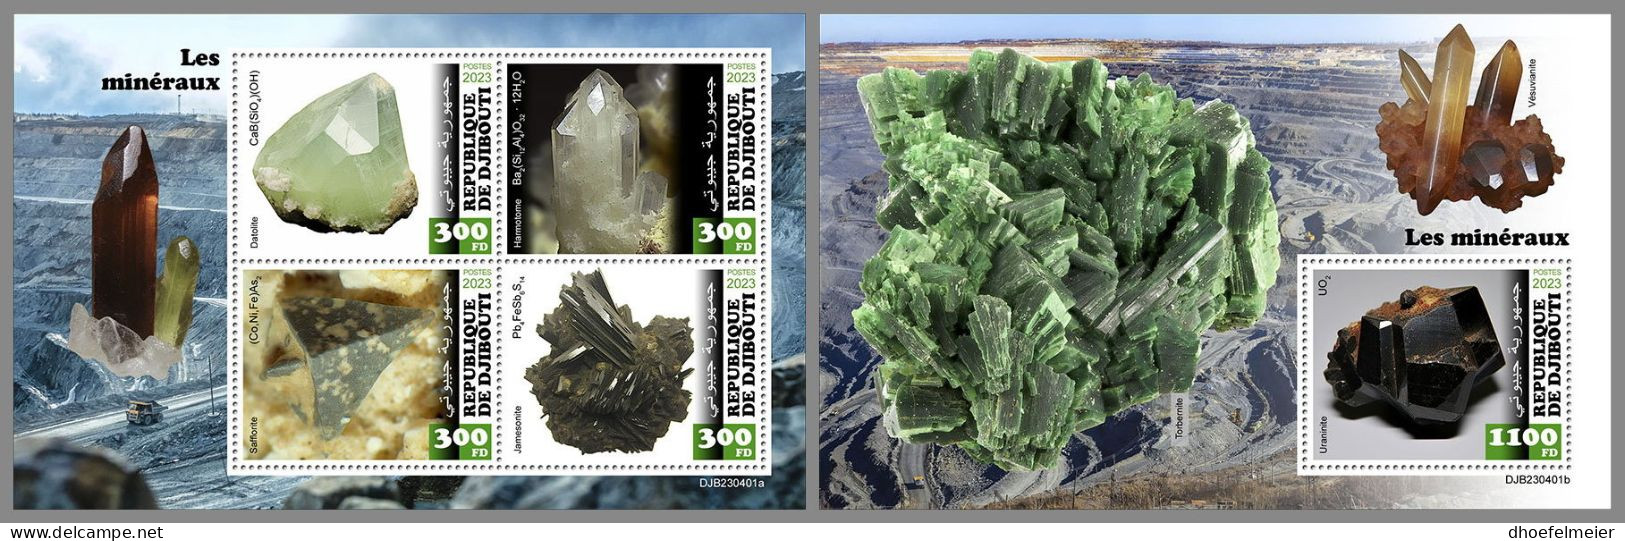 DJIBOUTI 2023 MNH Minerals Mineralien M/S+S/S – OFFICIAL ISSUE – DHQ2420 - Minerales